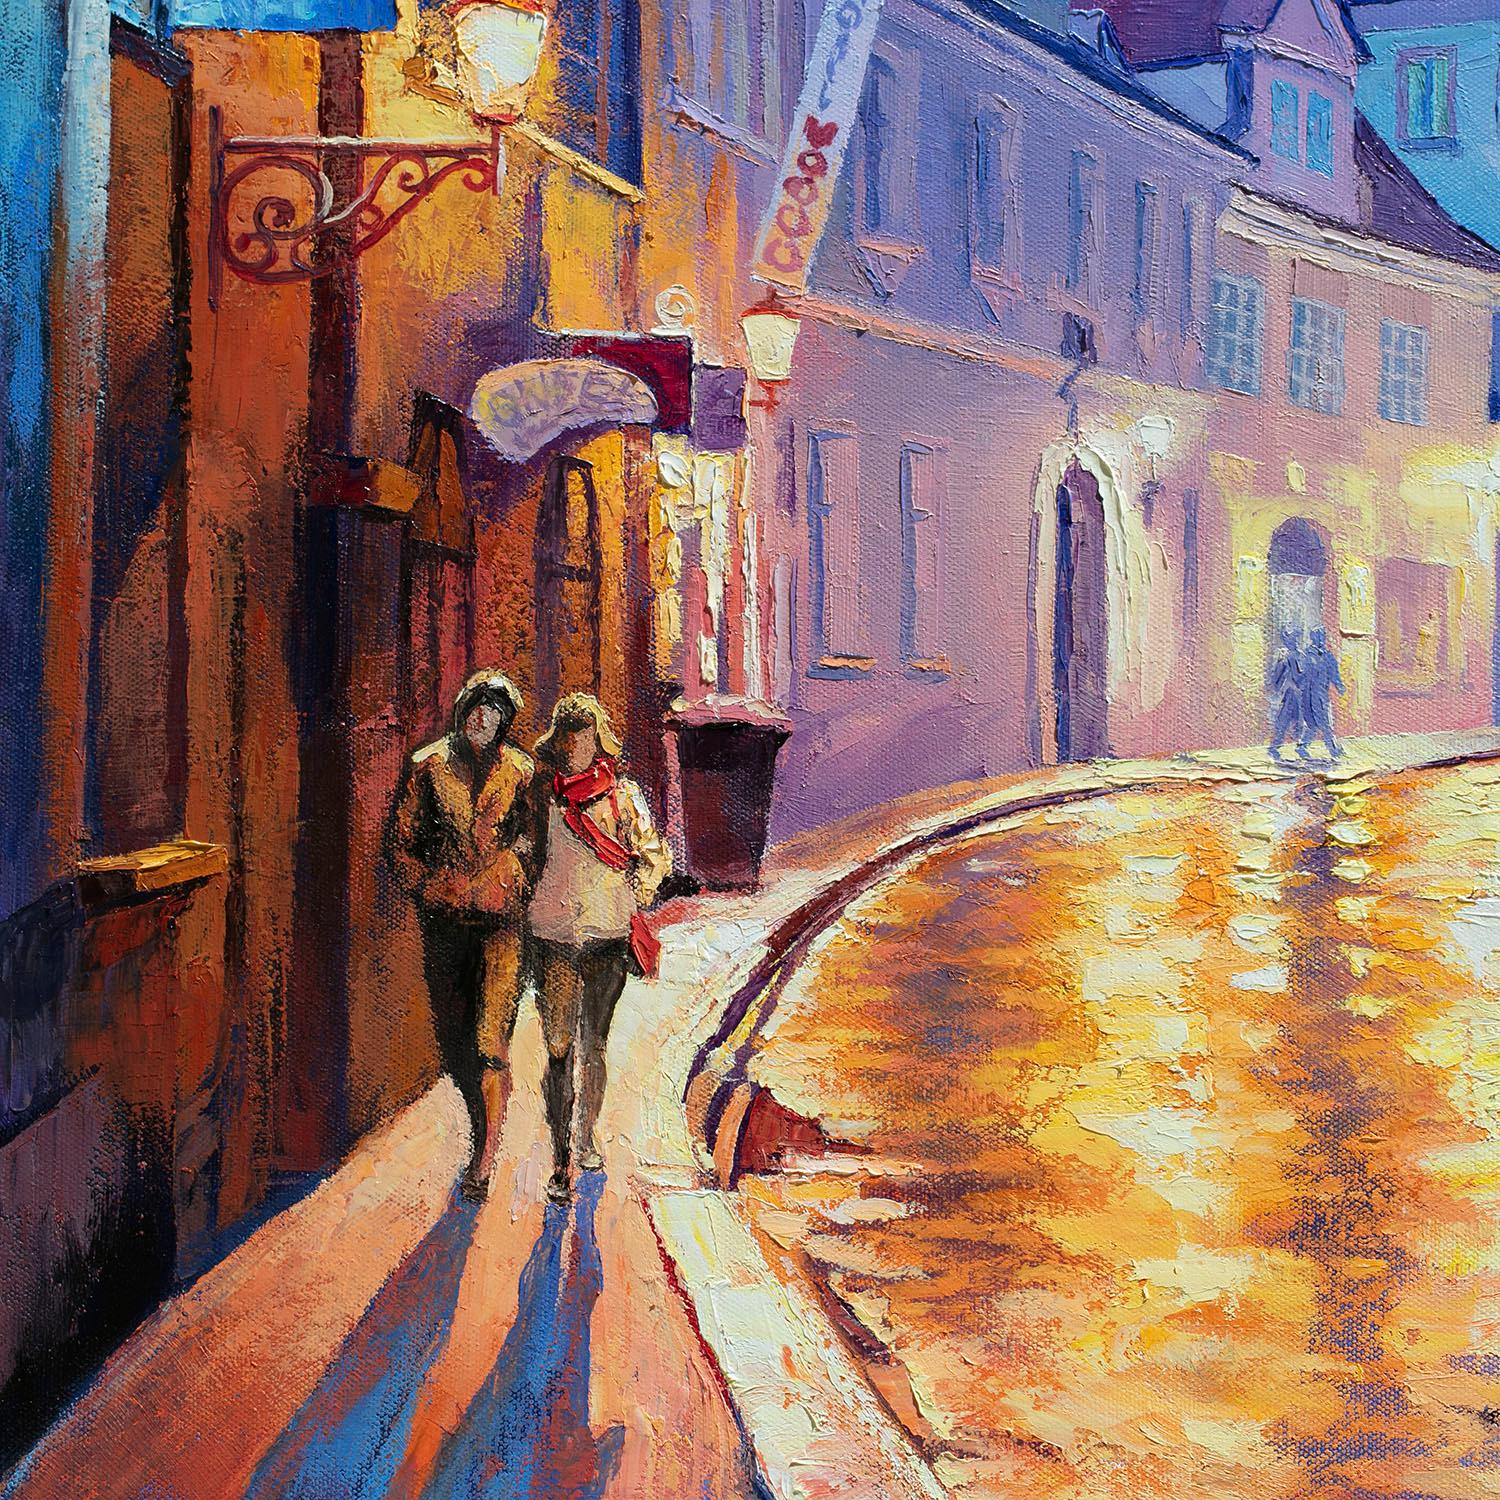 <p>Artist Comments<br>Artist Stanislav Sidorov captures a couple walking in a fairytale-looking town. The street light accentuates the building's medieval details and casts a dramatic aura on the pavement. The crescent moon illuminates the night